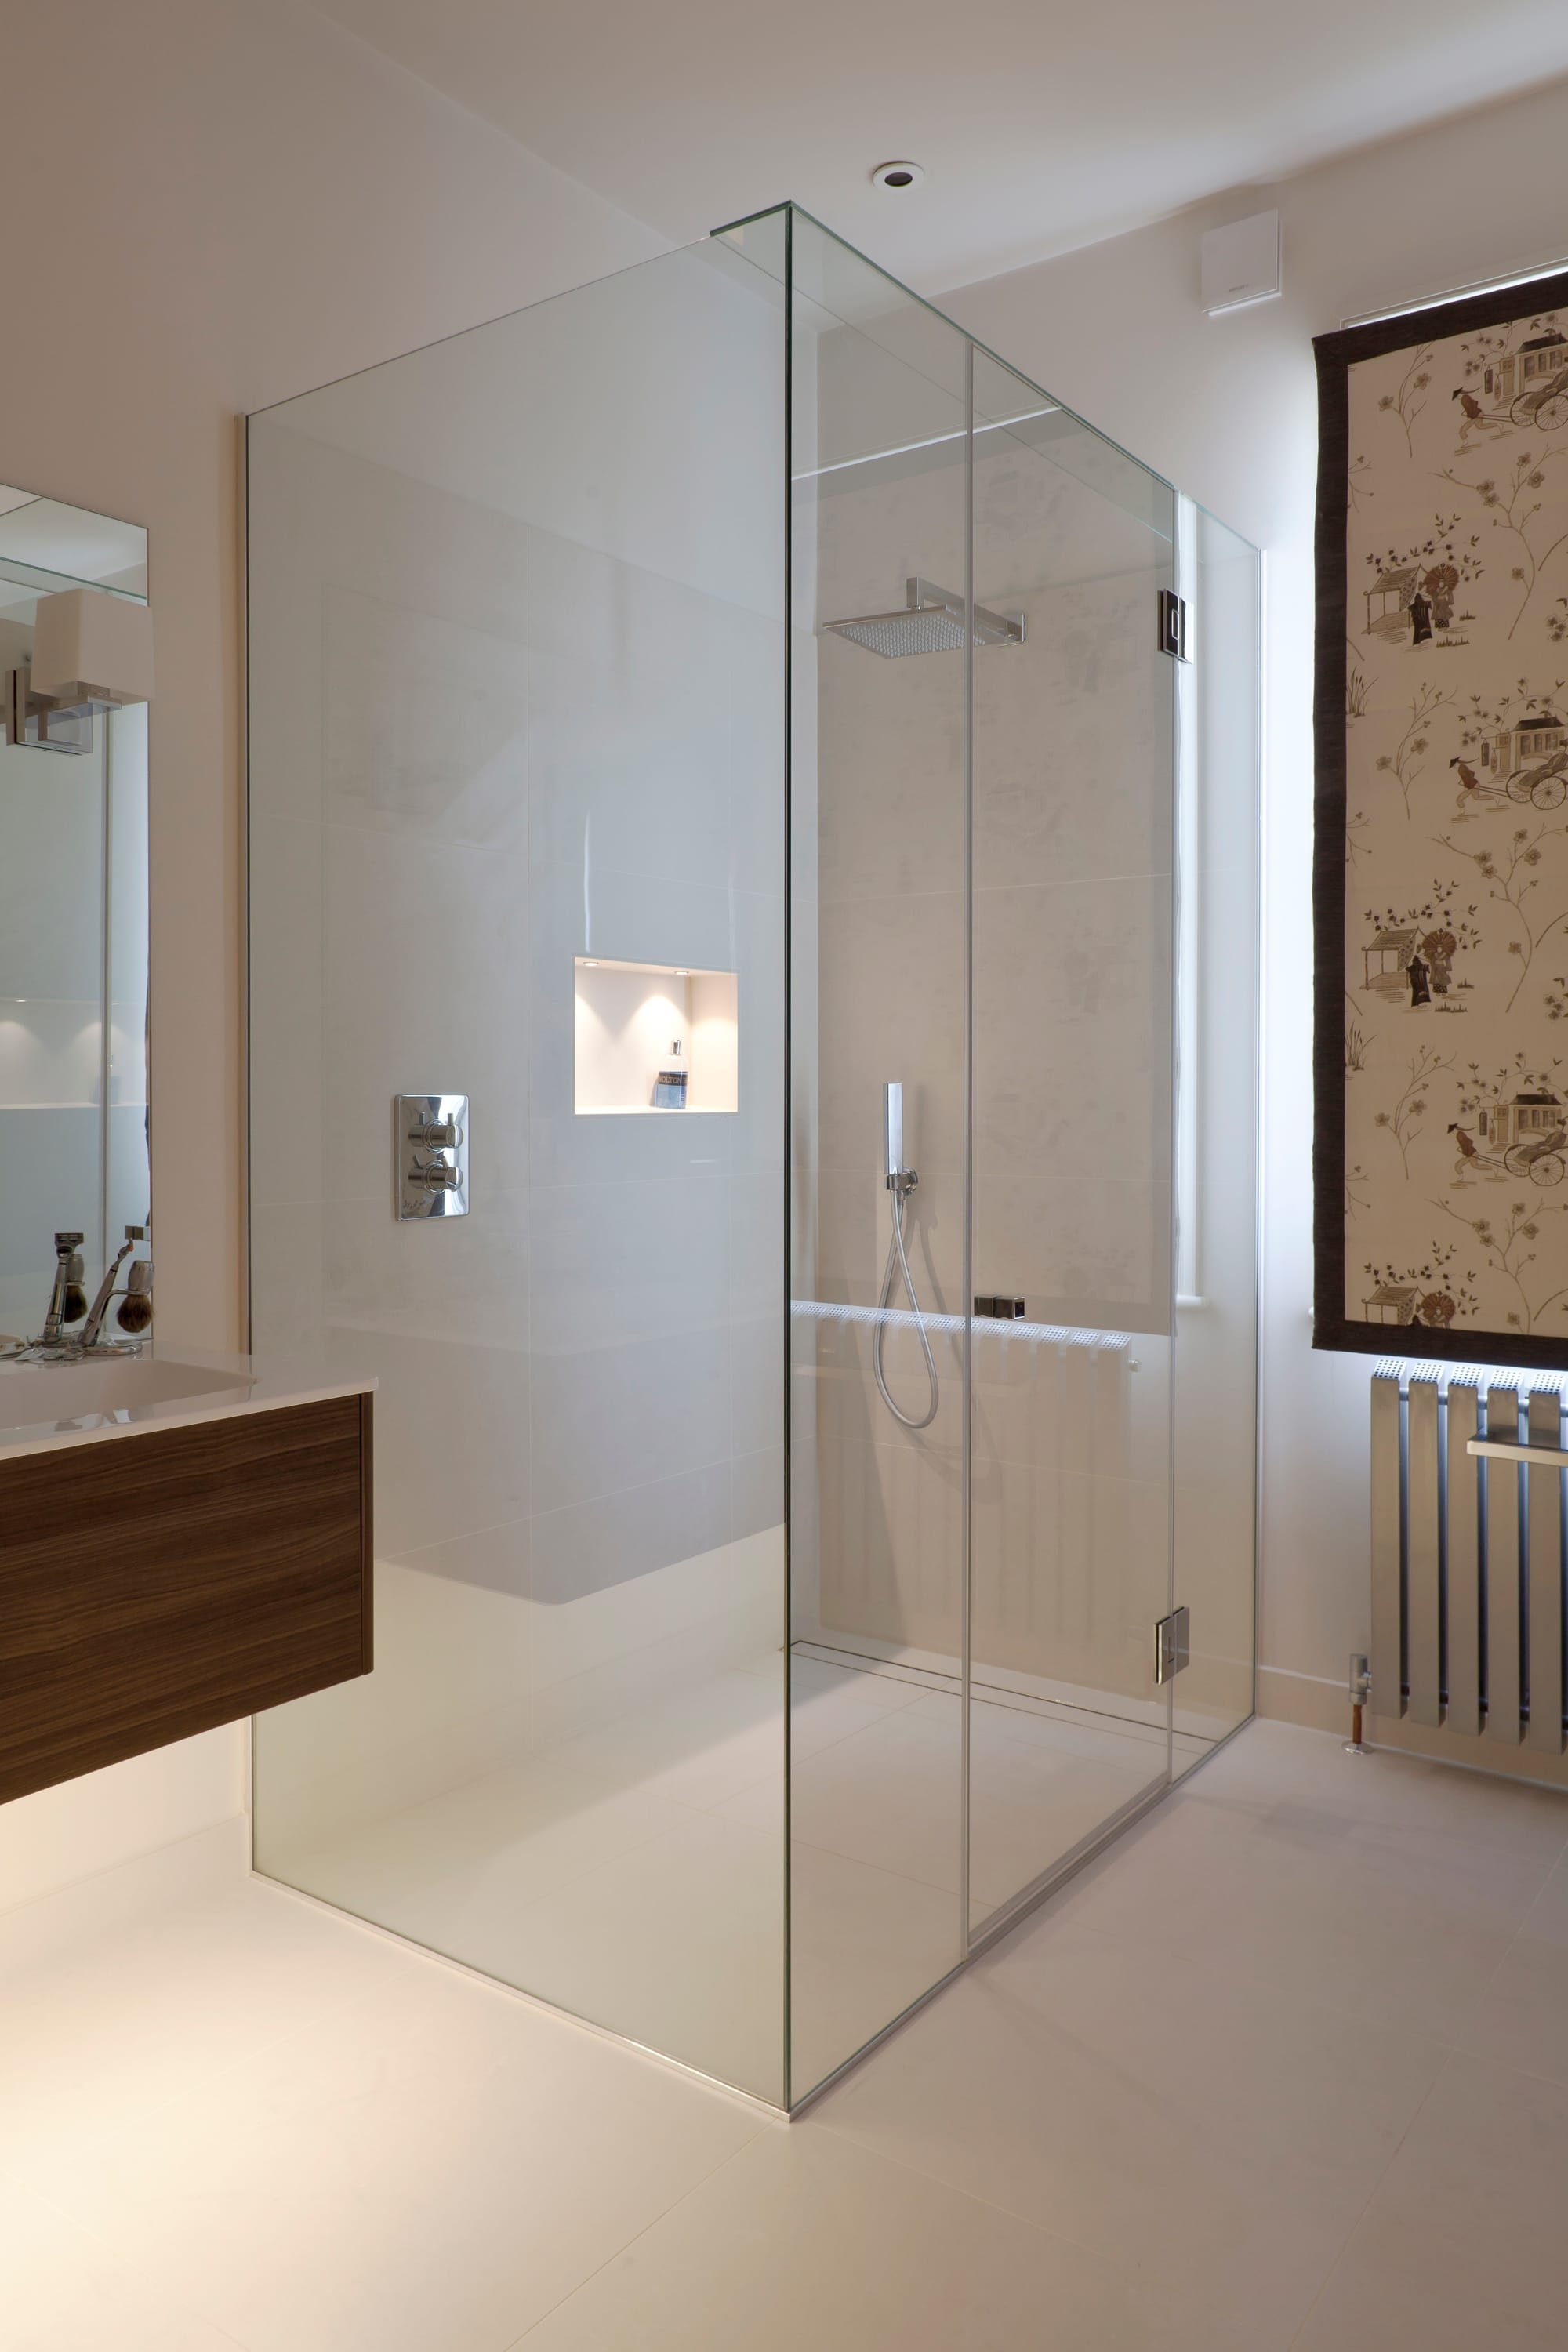 Sumptious shower in this SW11 bathroom with LED lit floating vanity unit and shower recess.